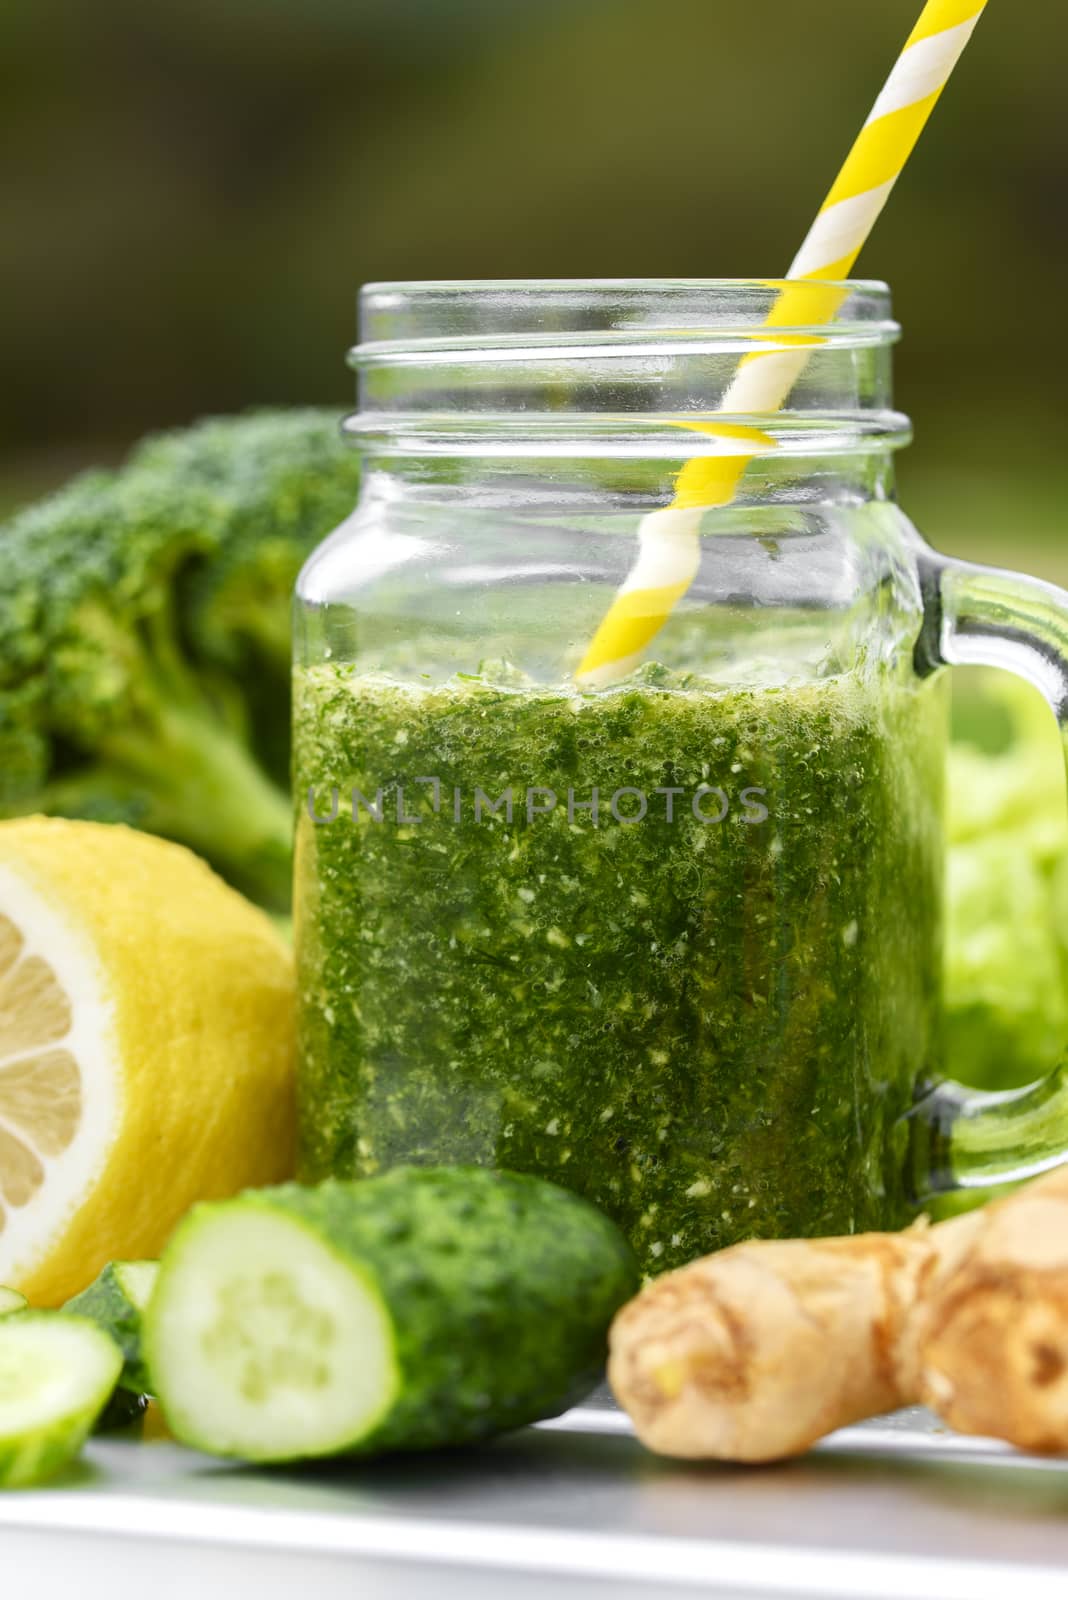 Green smoothie. Healthy smoothies with fresh ingredients.